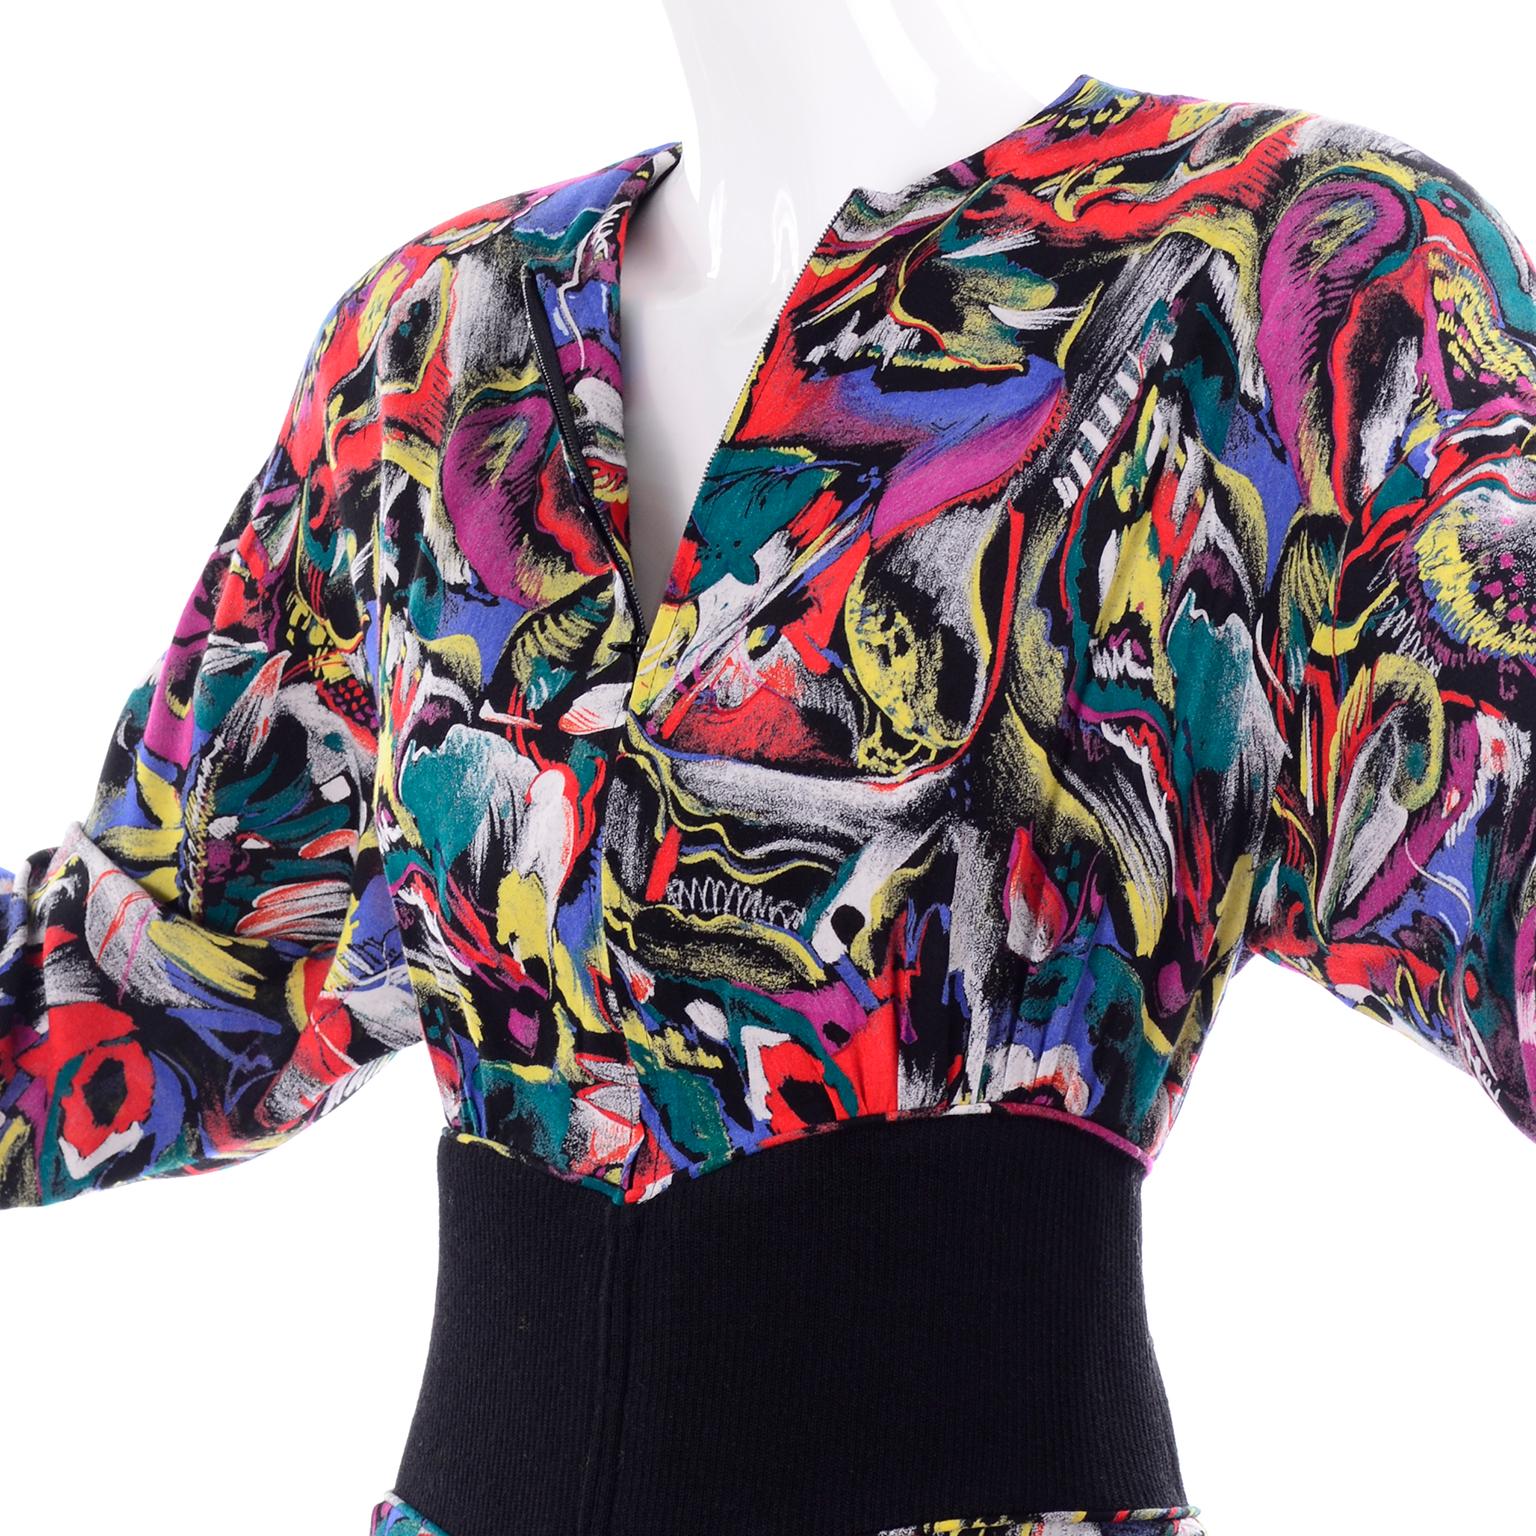 Black 1980s Hanae Mori Vintage Dress in Abstract Colorful Chalk Print With Pockets 6/8